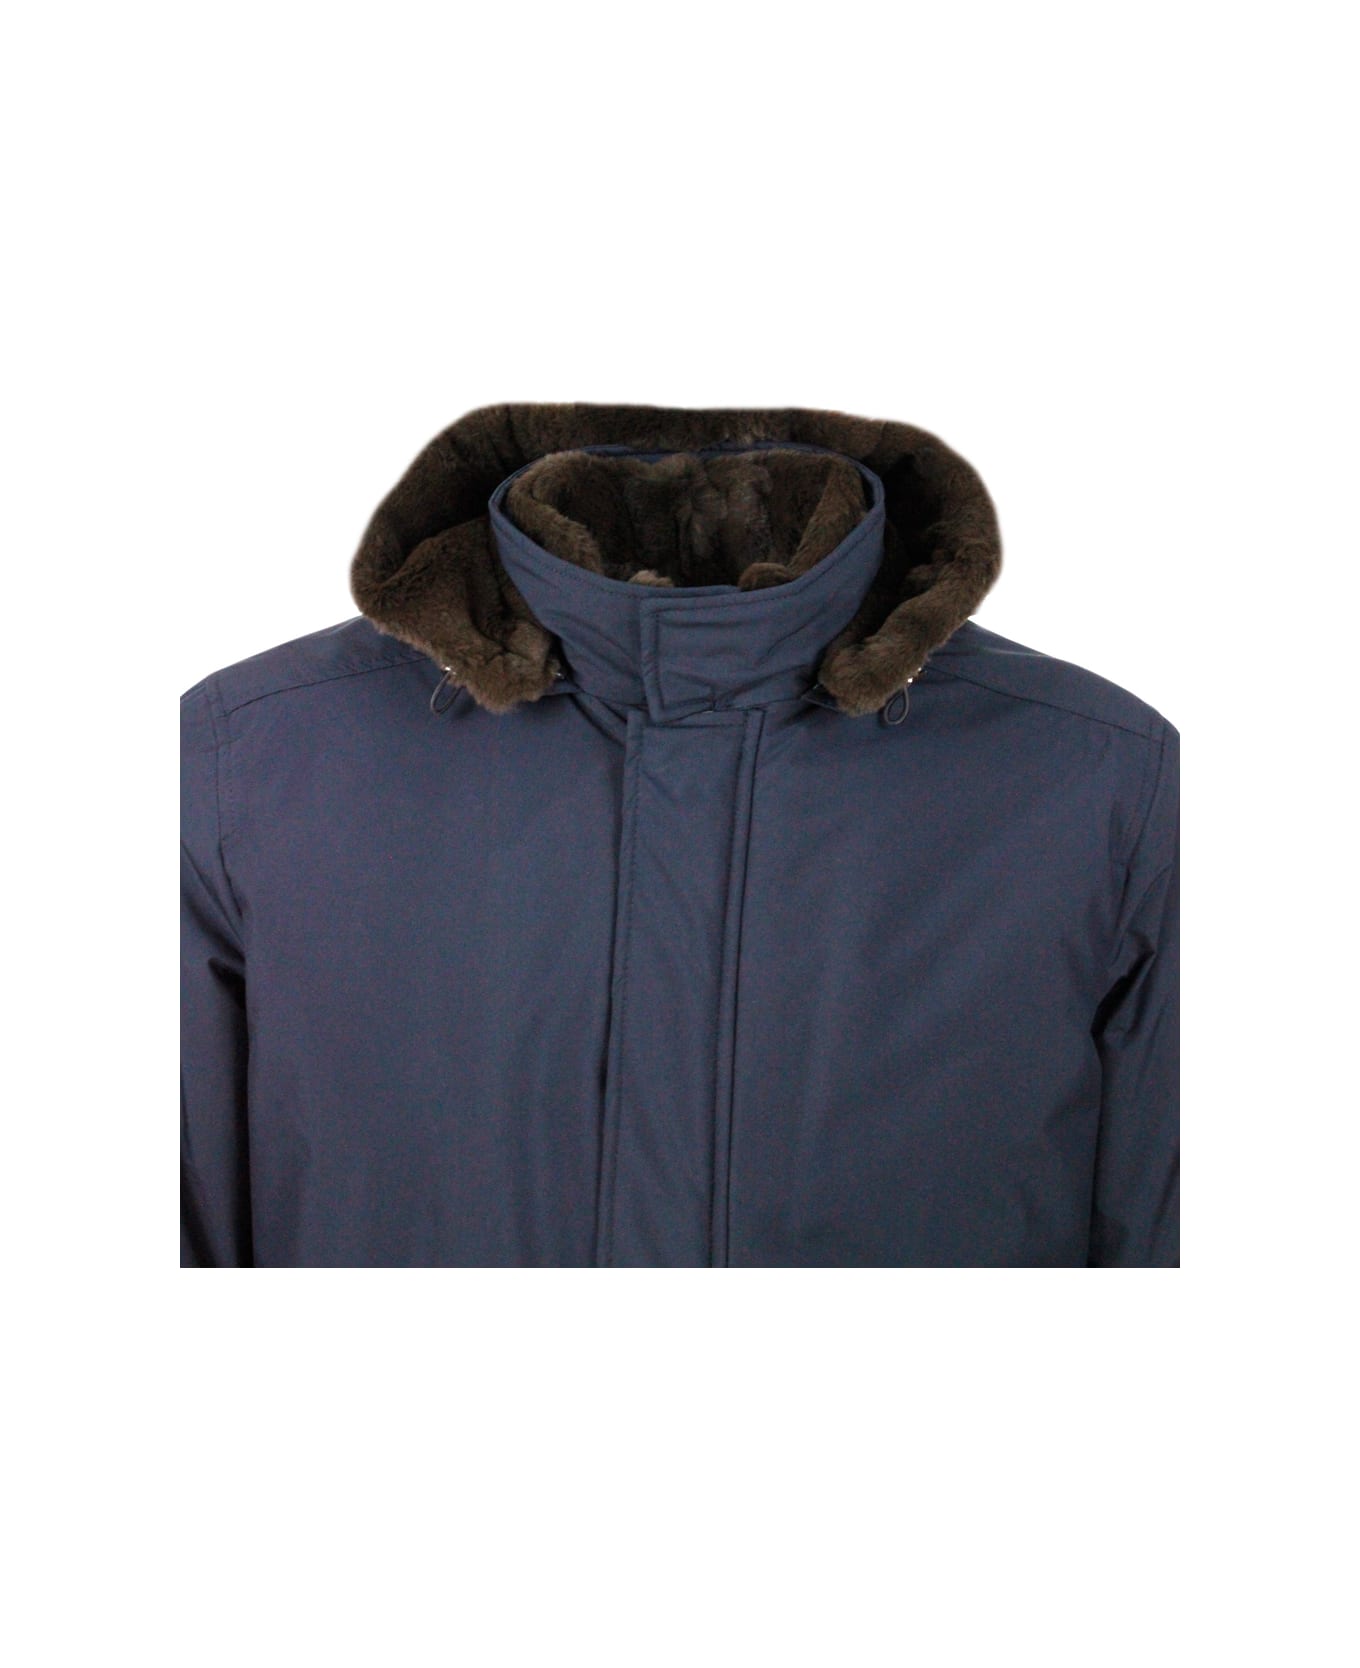 Barba Napoli 3/4 Length Luxury Jacket Padded In Technical Fabric With Precious And Precious Lapin Lining And Detachable Hood. Zip Closure And Front Pockets - Blu ジャケット